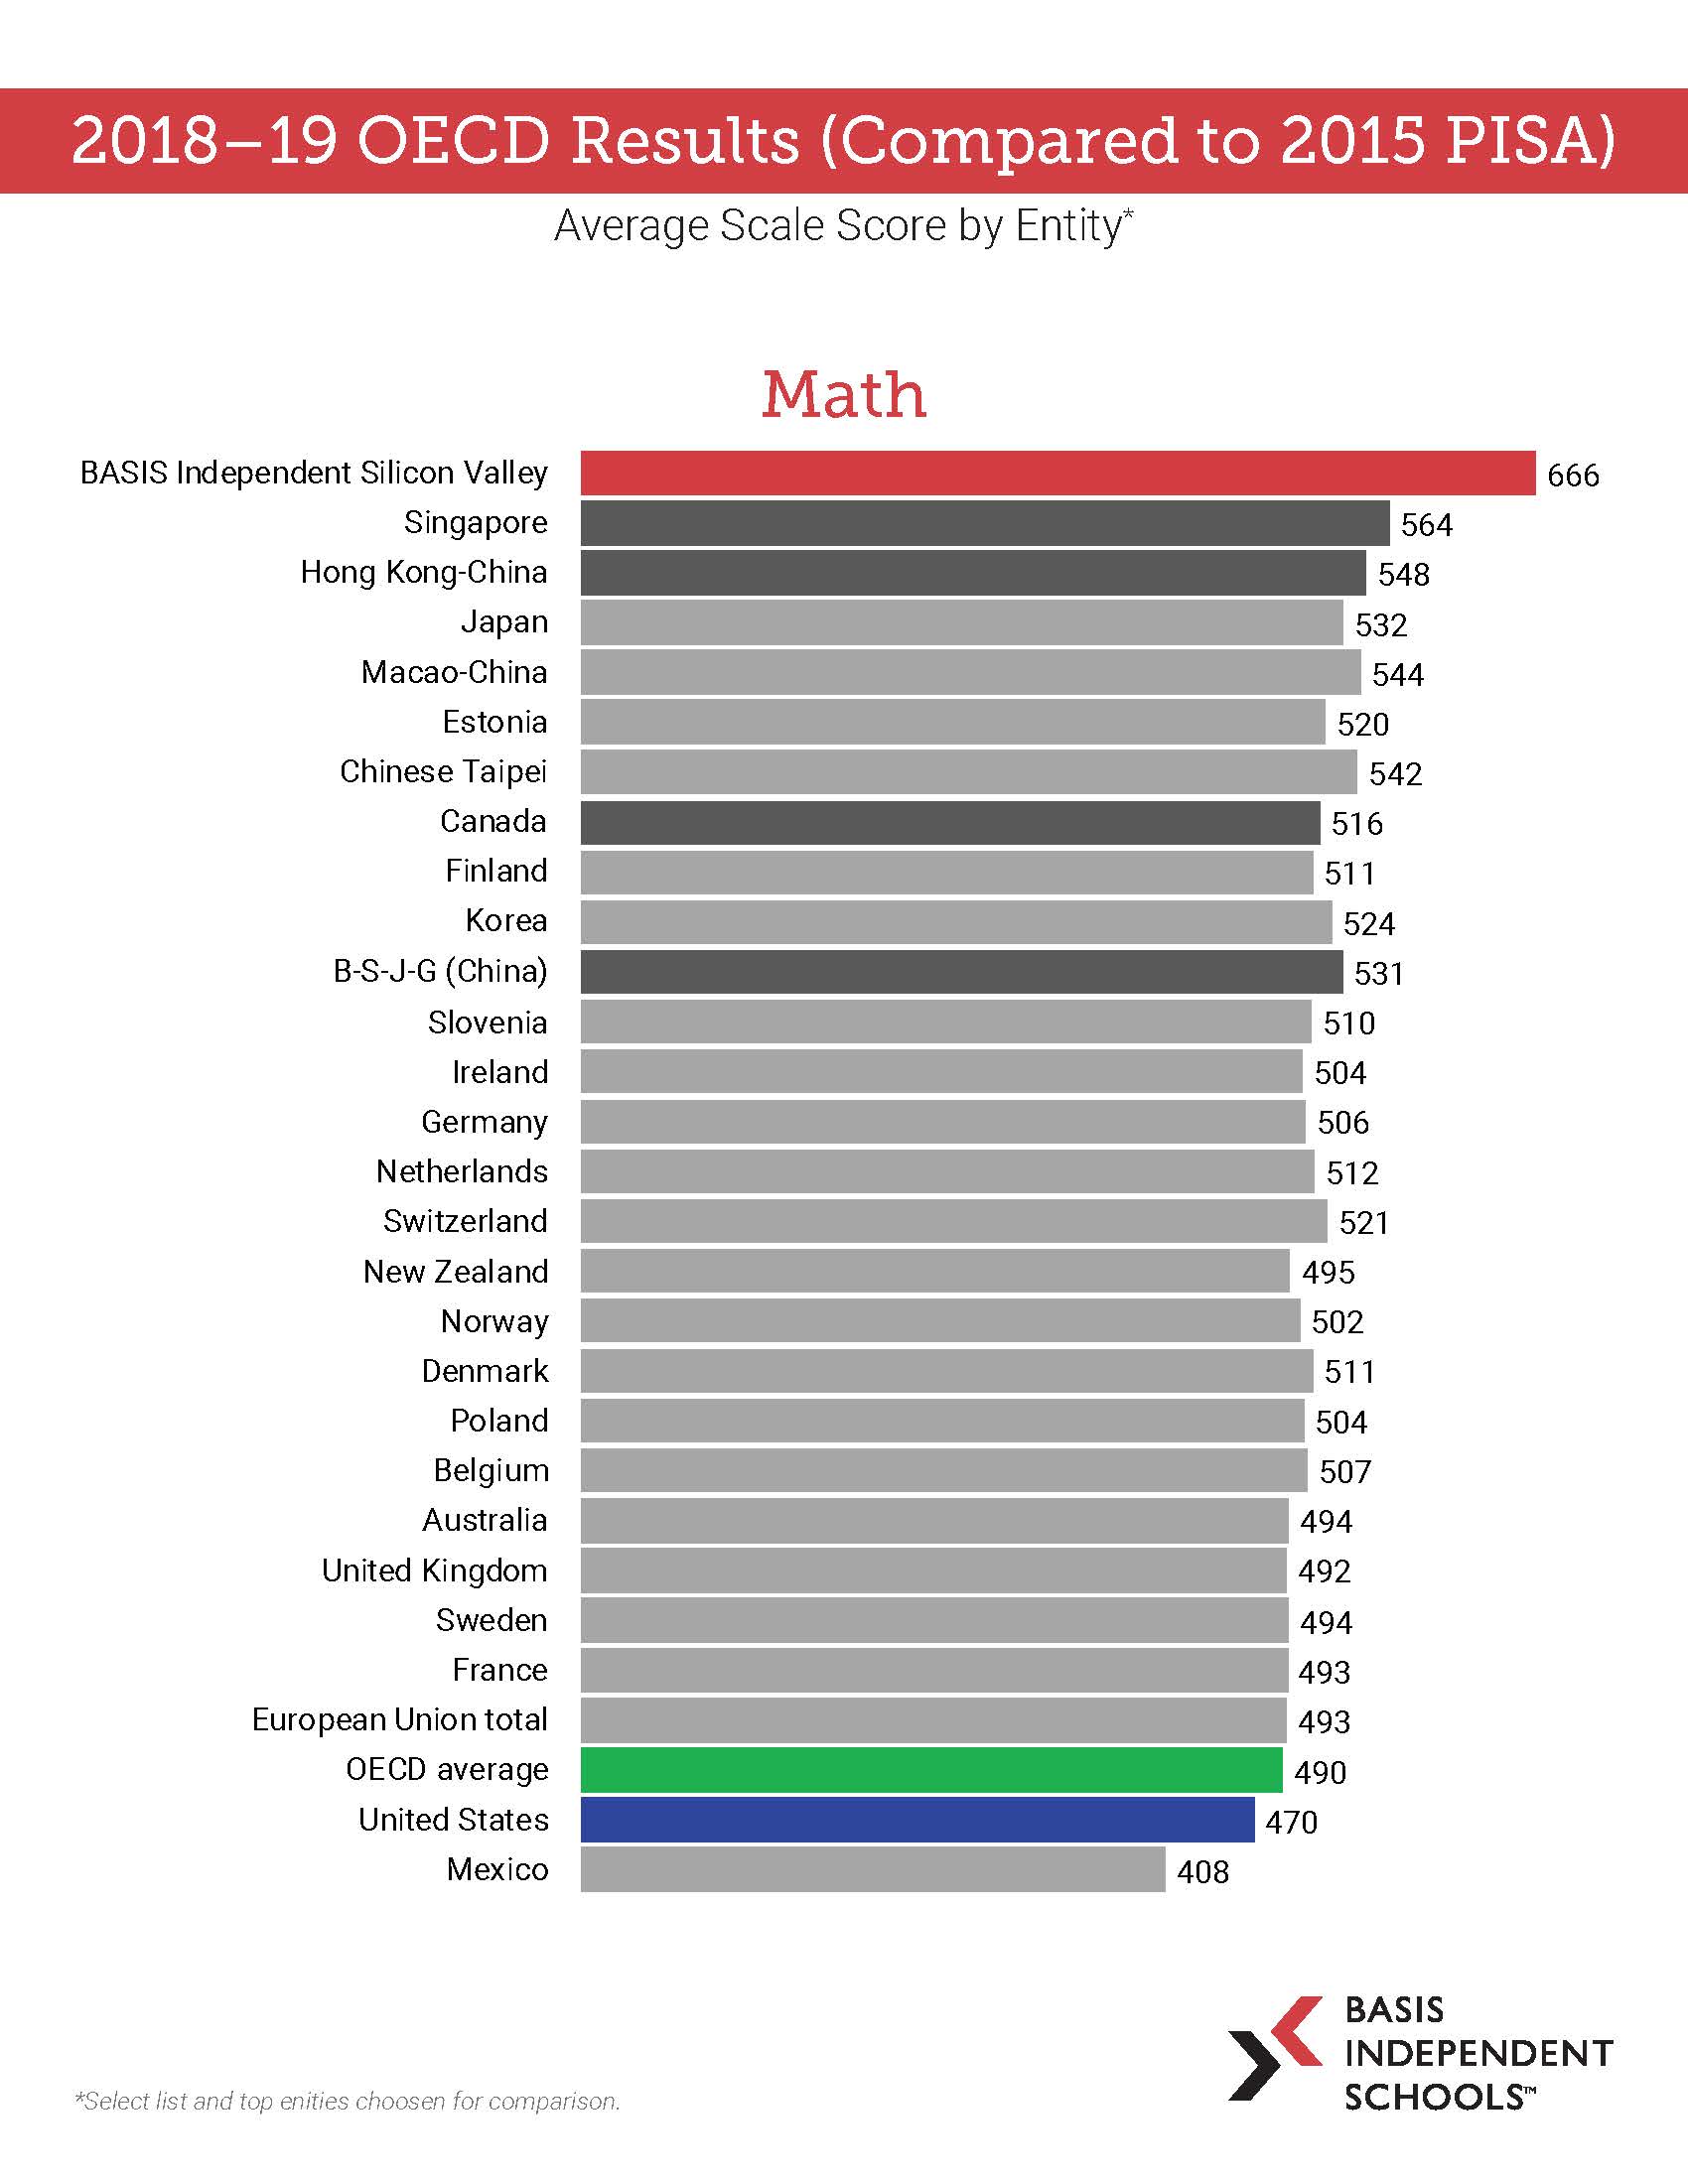 2018 - 2019 OECD Results_Page_1